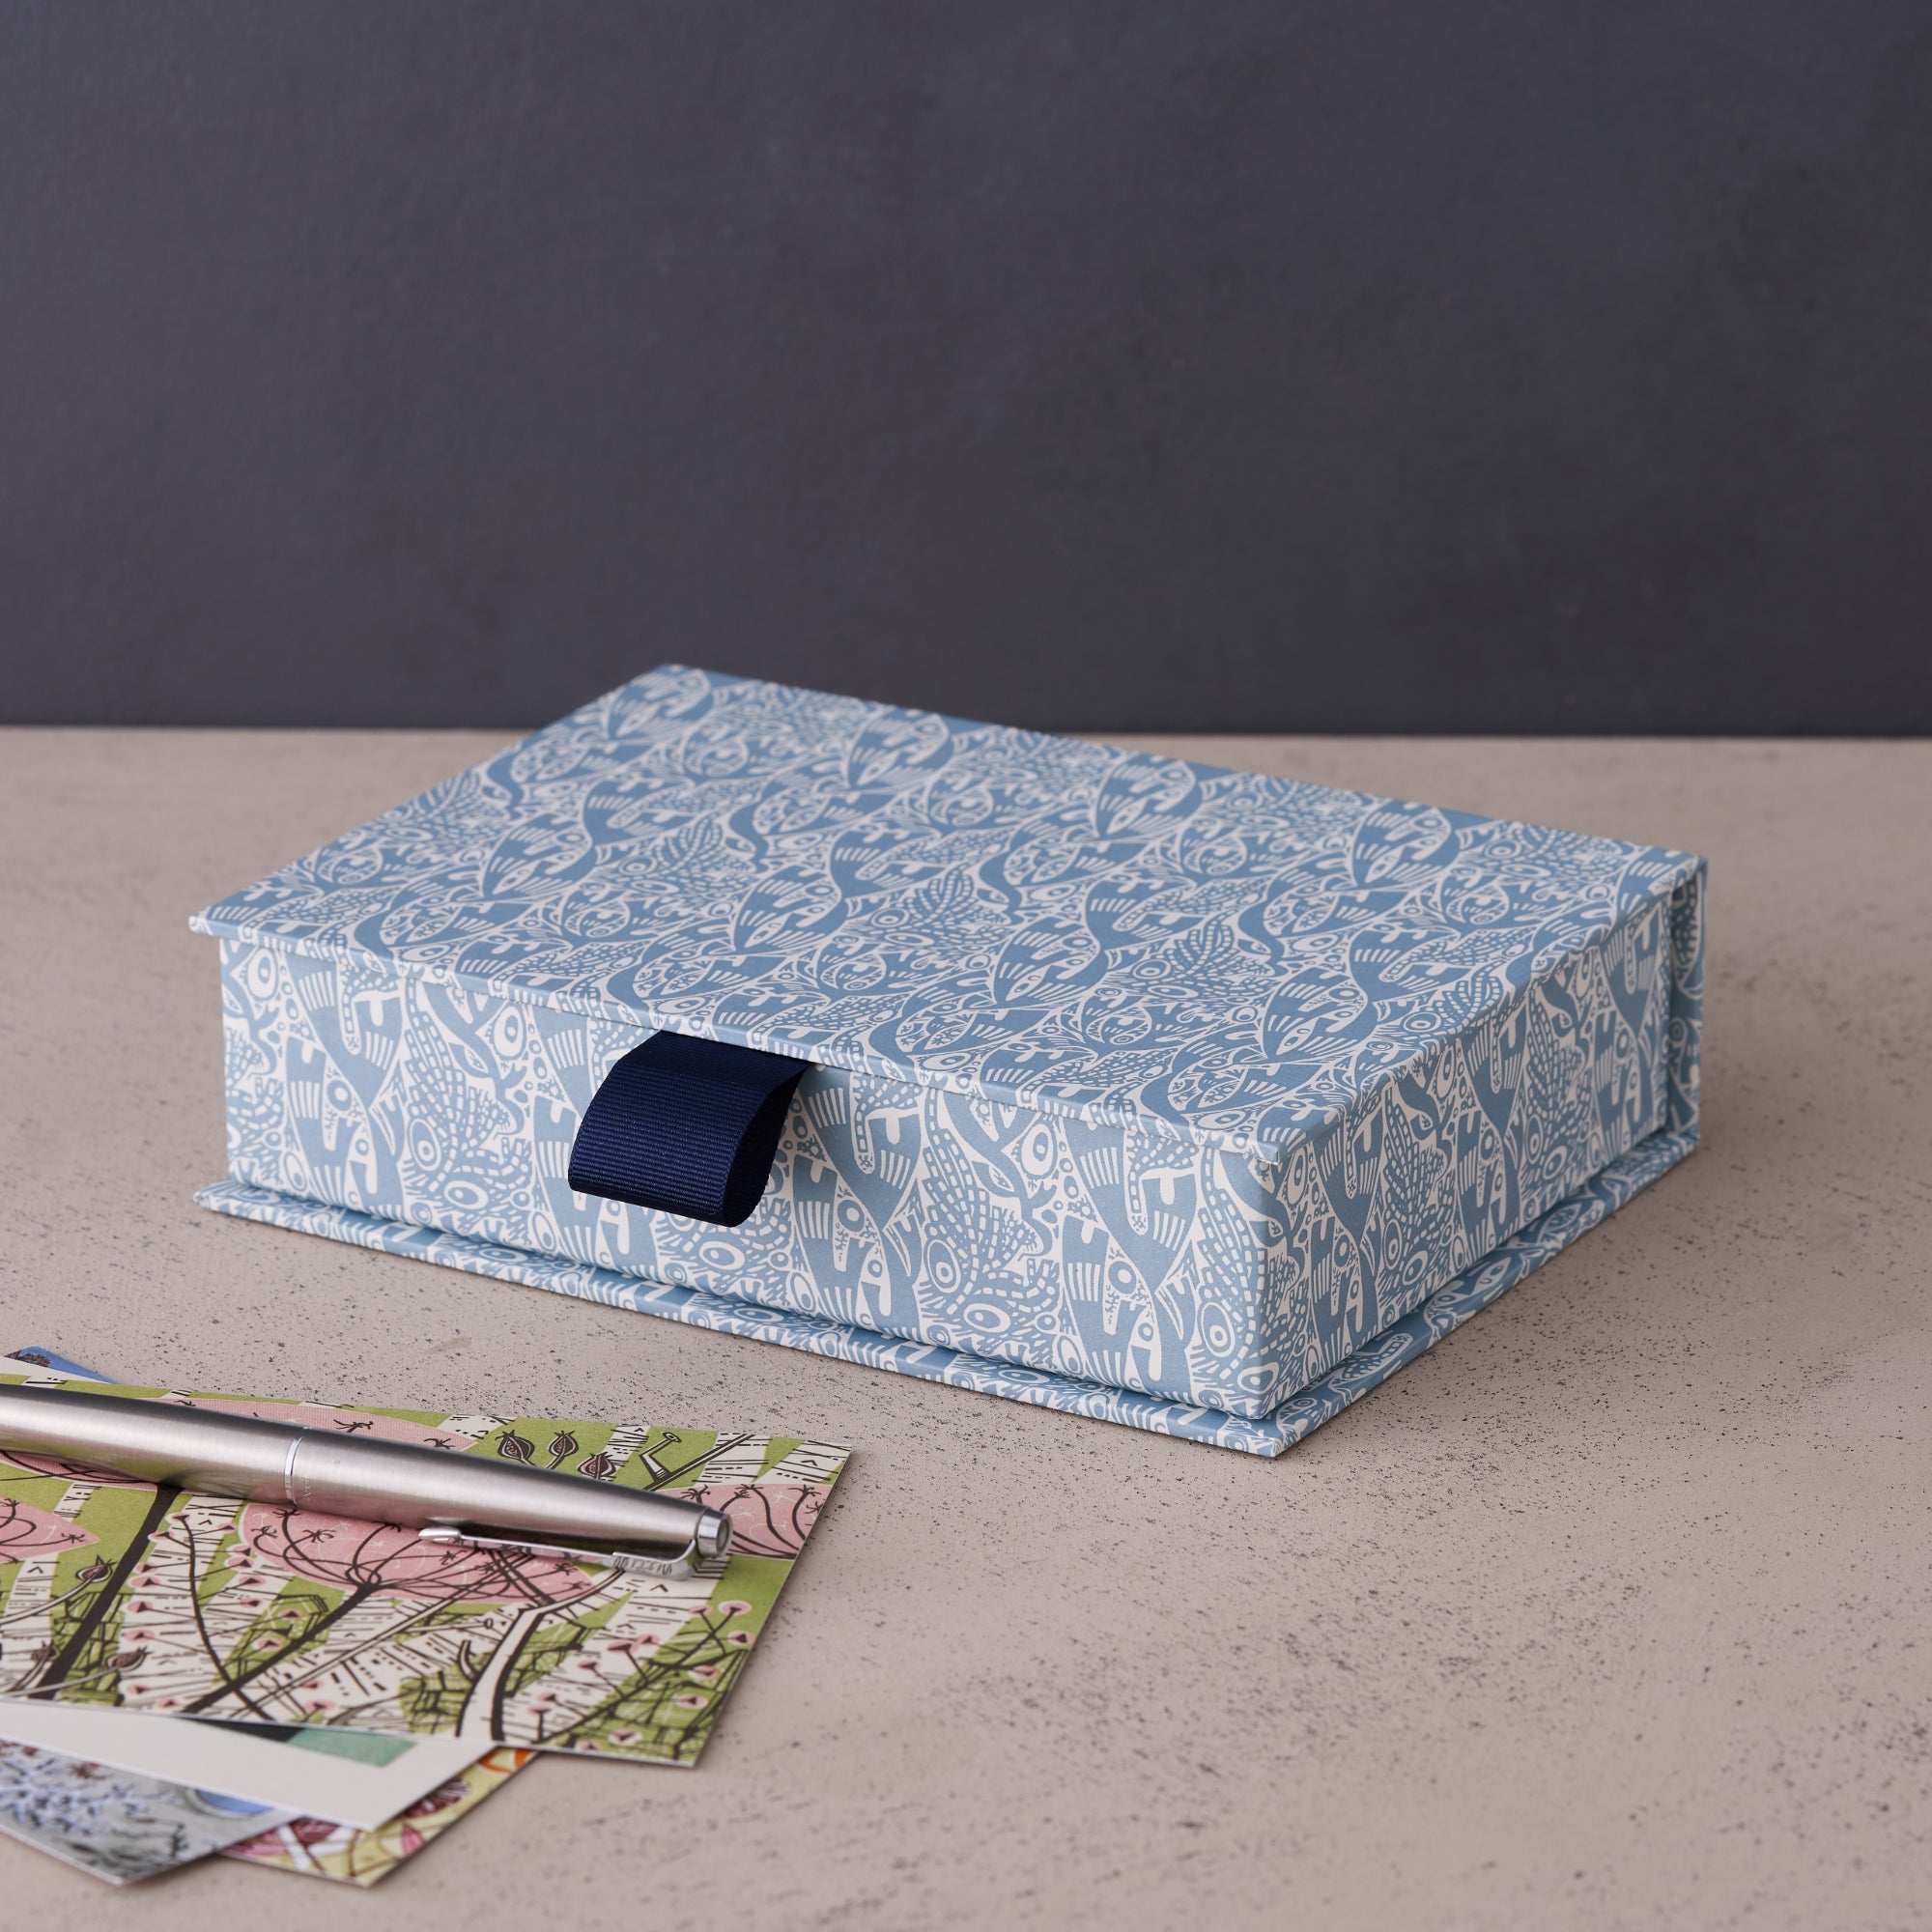 Rockpool Patterned Paper Box - Angie Lewin - St. Jude's Prints